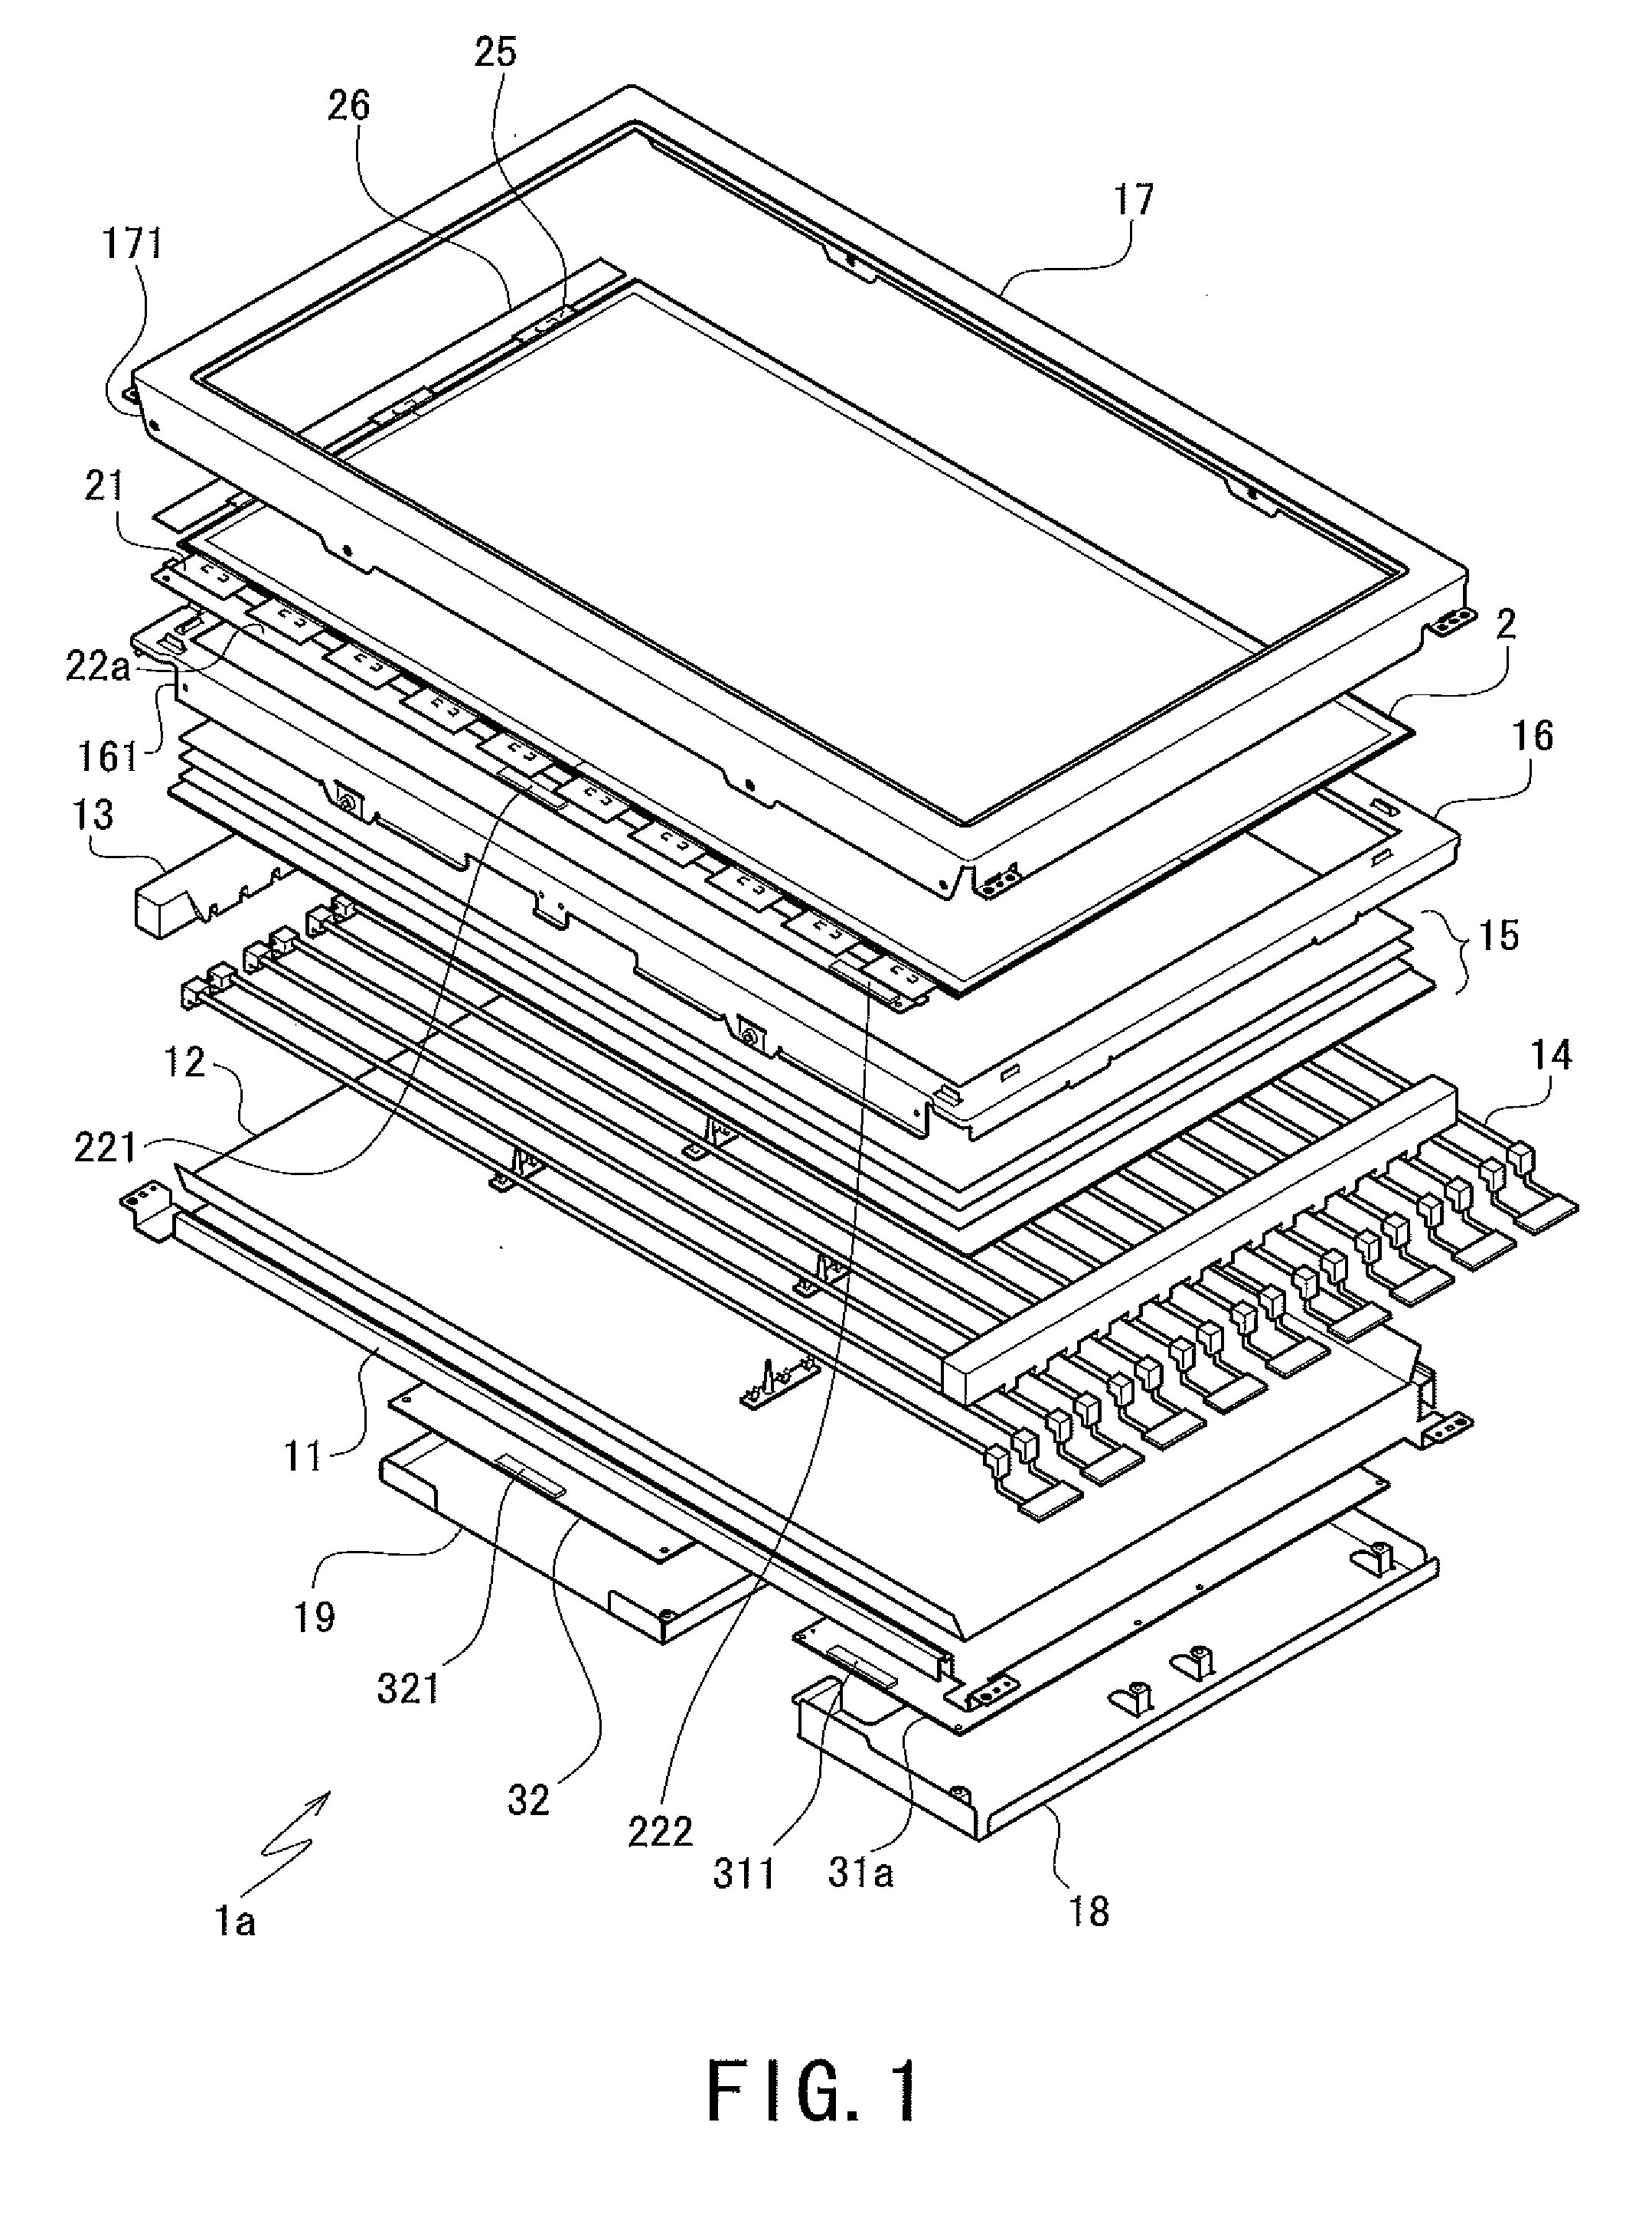 Display device and a television receiver having the display device